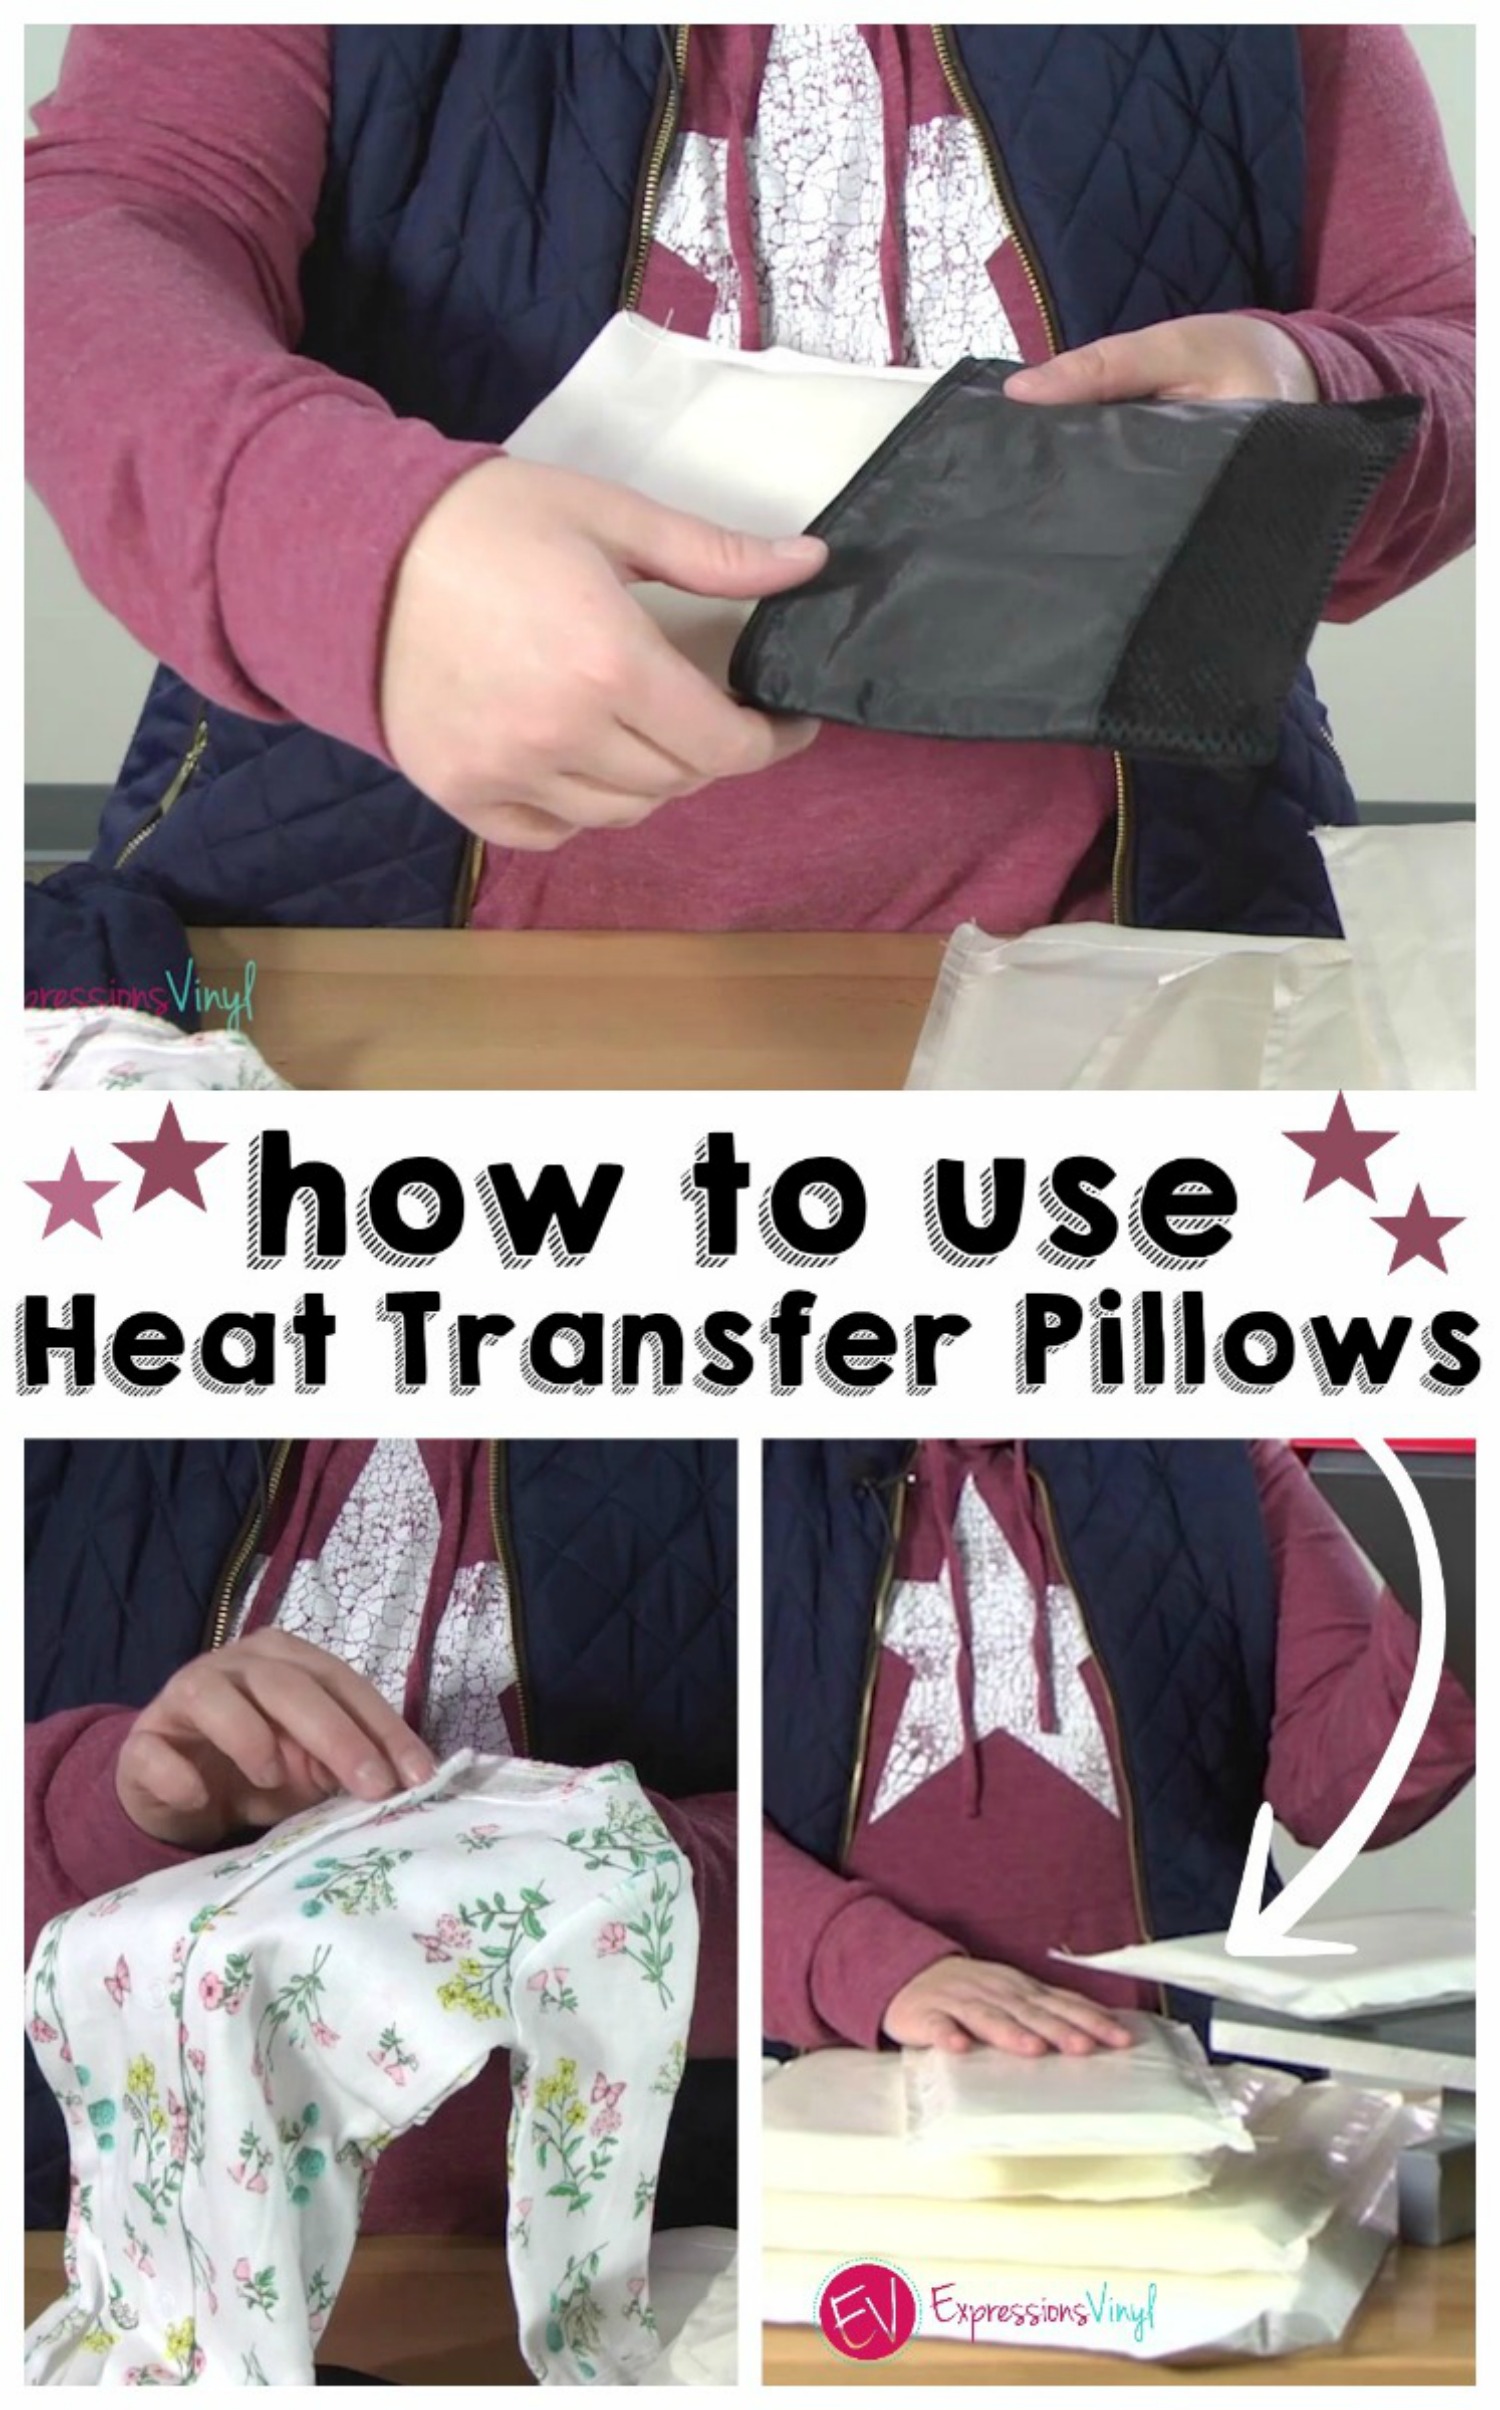 How to use Heat Transfer Pillow Correctly - Expressions Vinyl